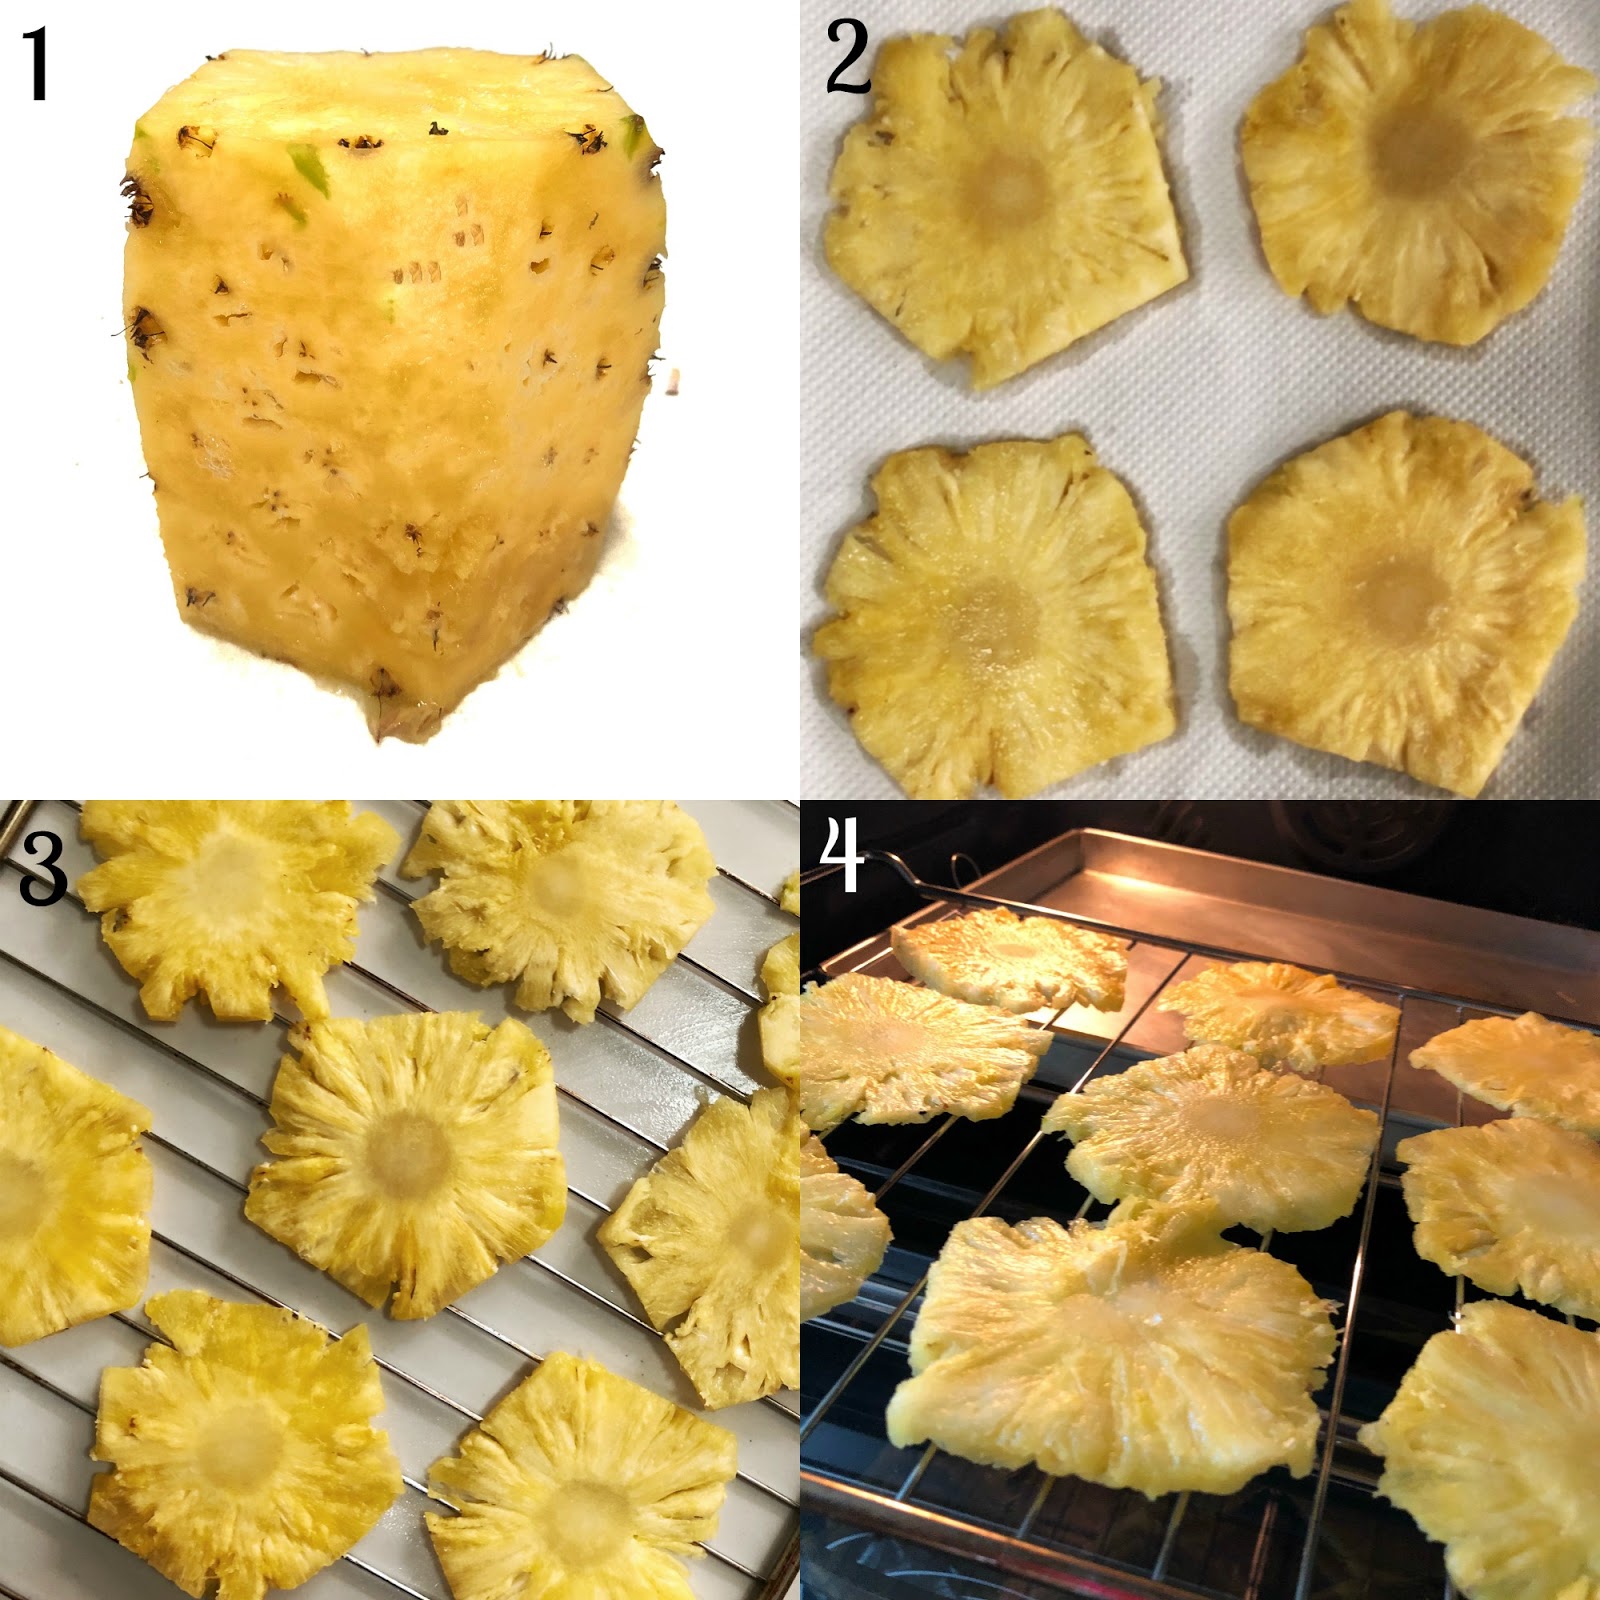 Steps to make dried pineapple flowers